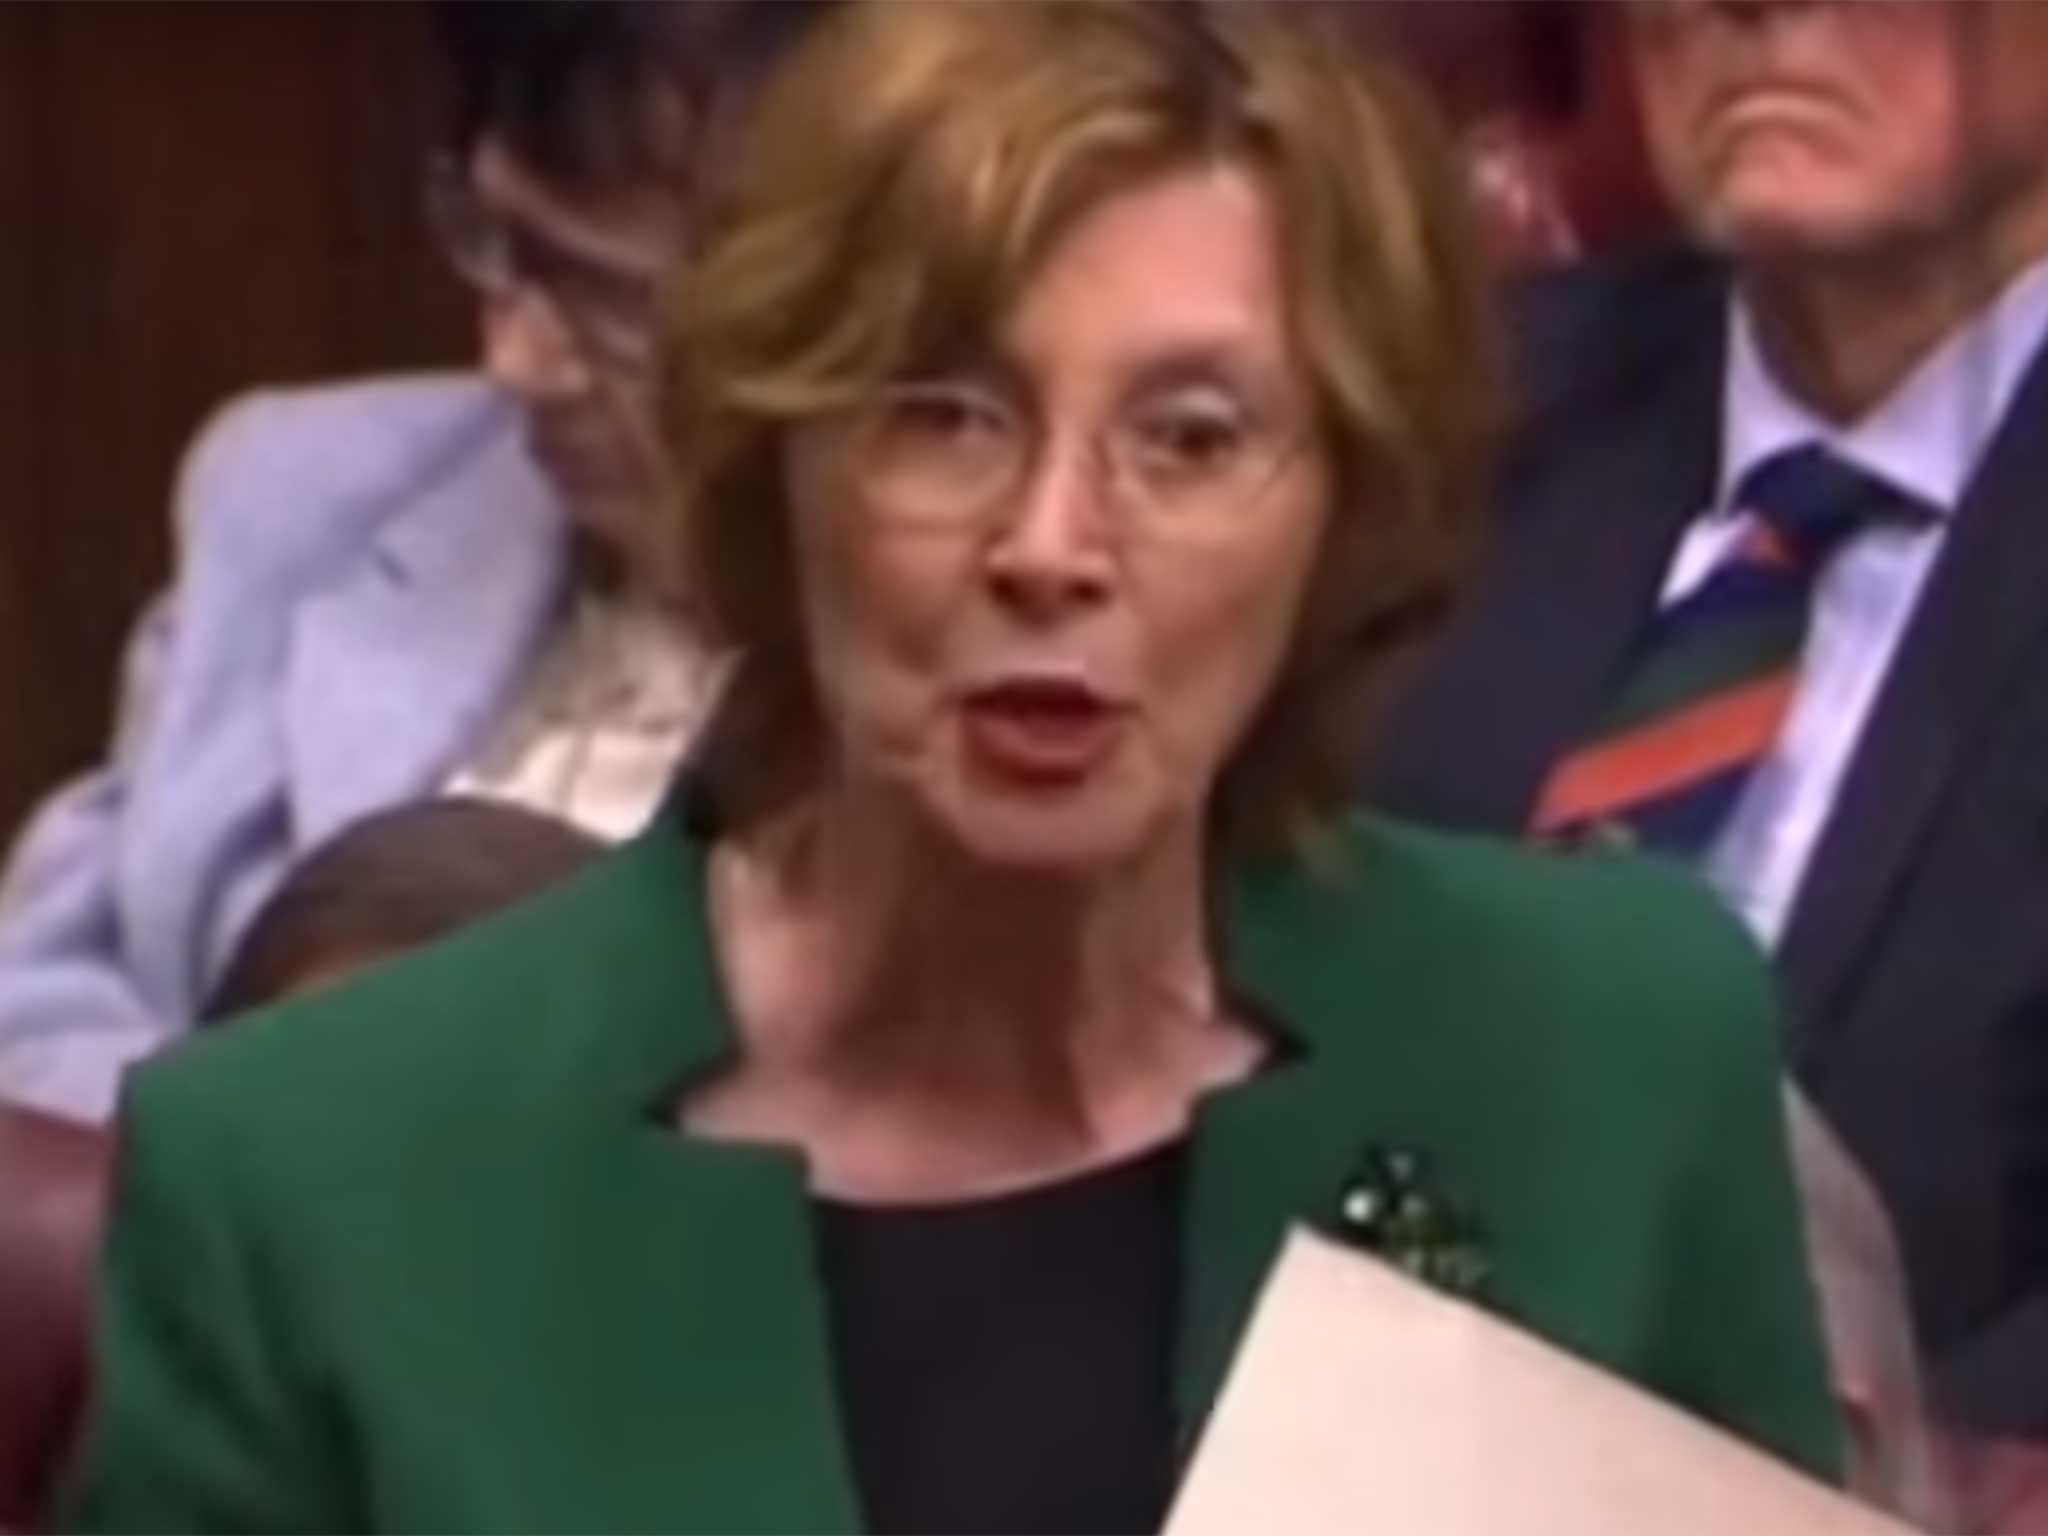 Baroness Hollis speaking in the House of Lords on Monday night